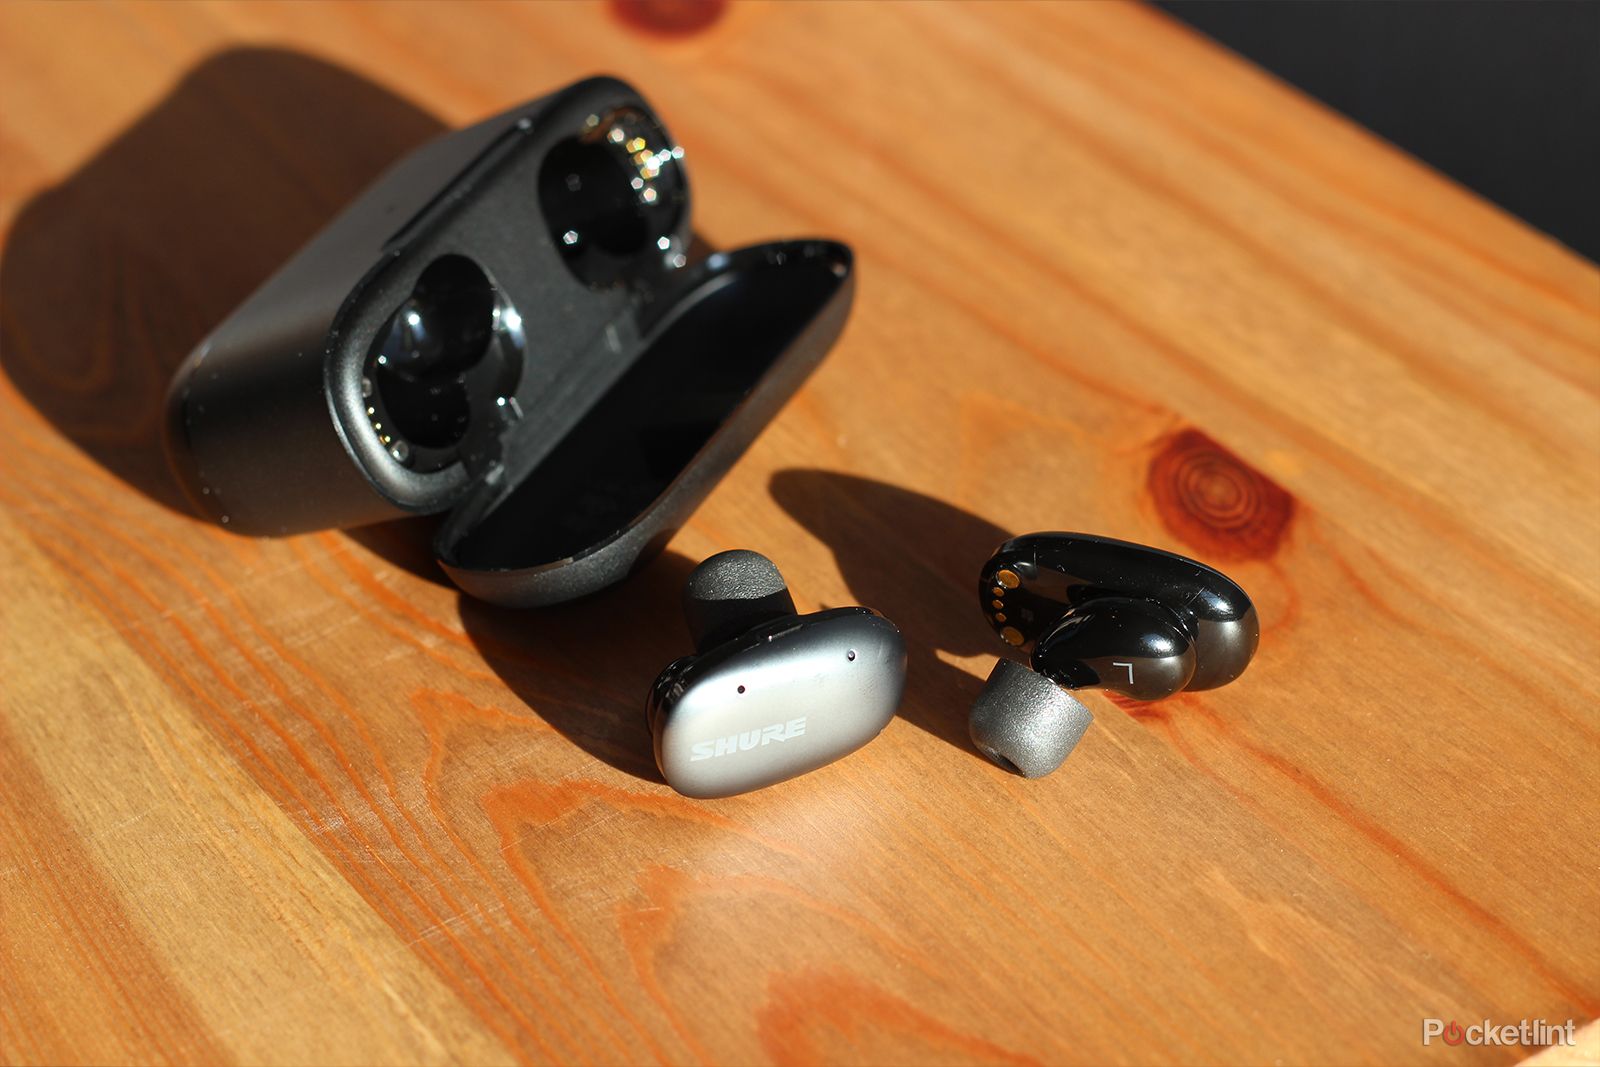 Shure Aonic Free earbuds review: Bigger can be better photo 3